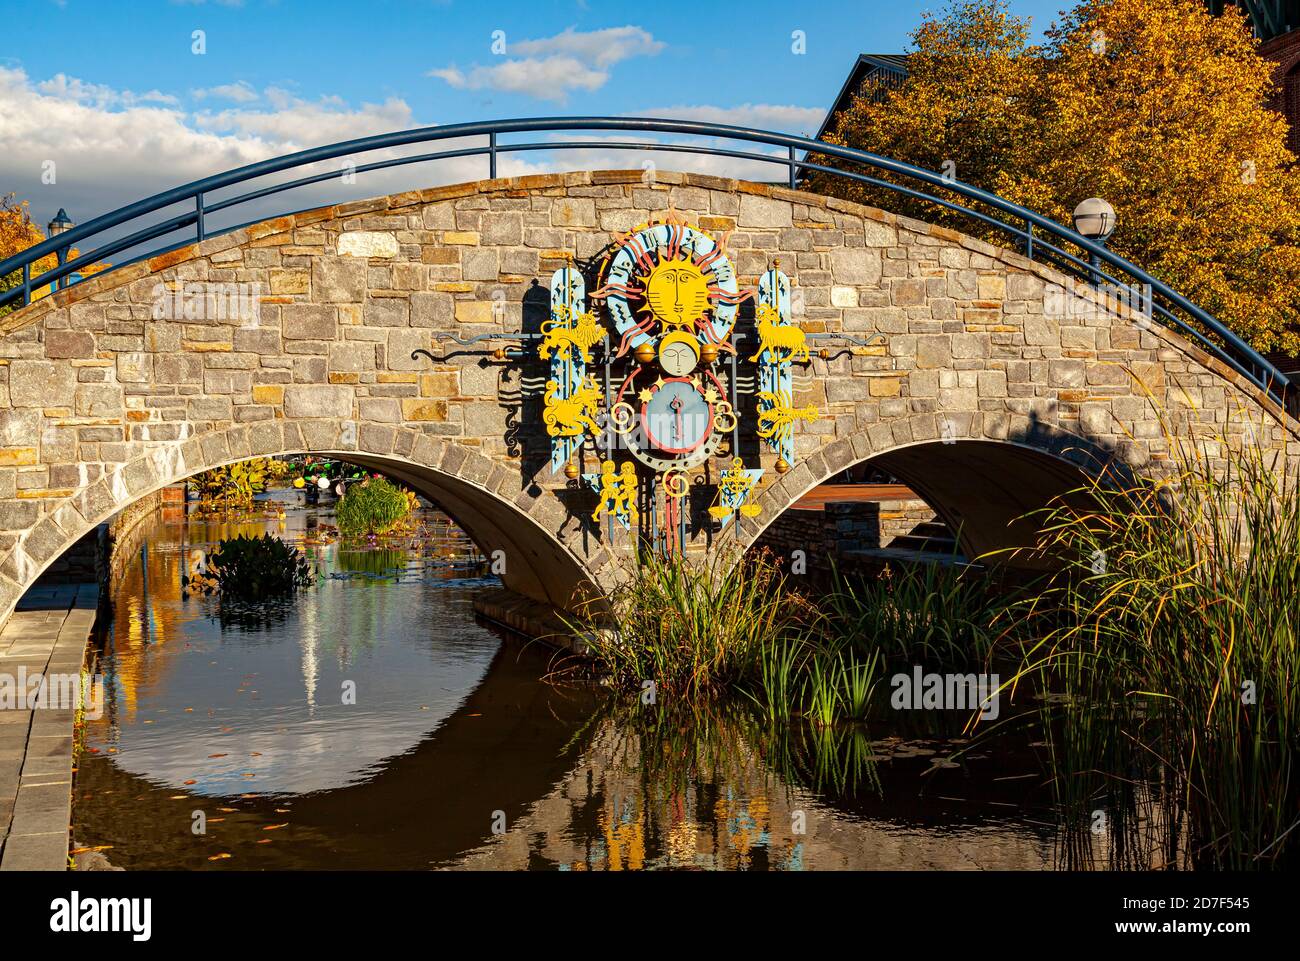 Frederick, MD, USA 10/13/2020: A scenic stone arched bridge on Carroll Creek with zodiac themed metal art decorations on it. Autumn leaves fall on wat Stock Photo